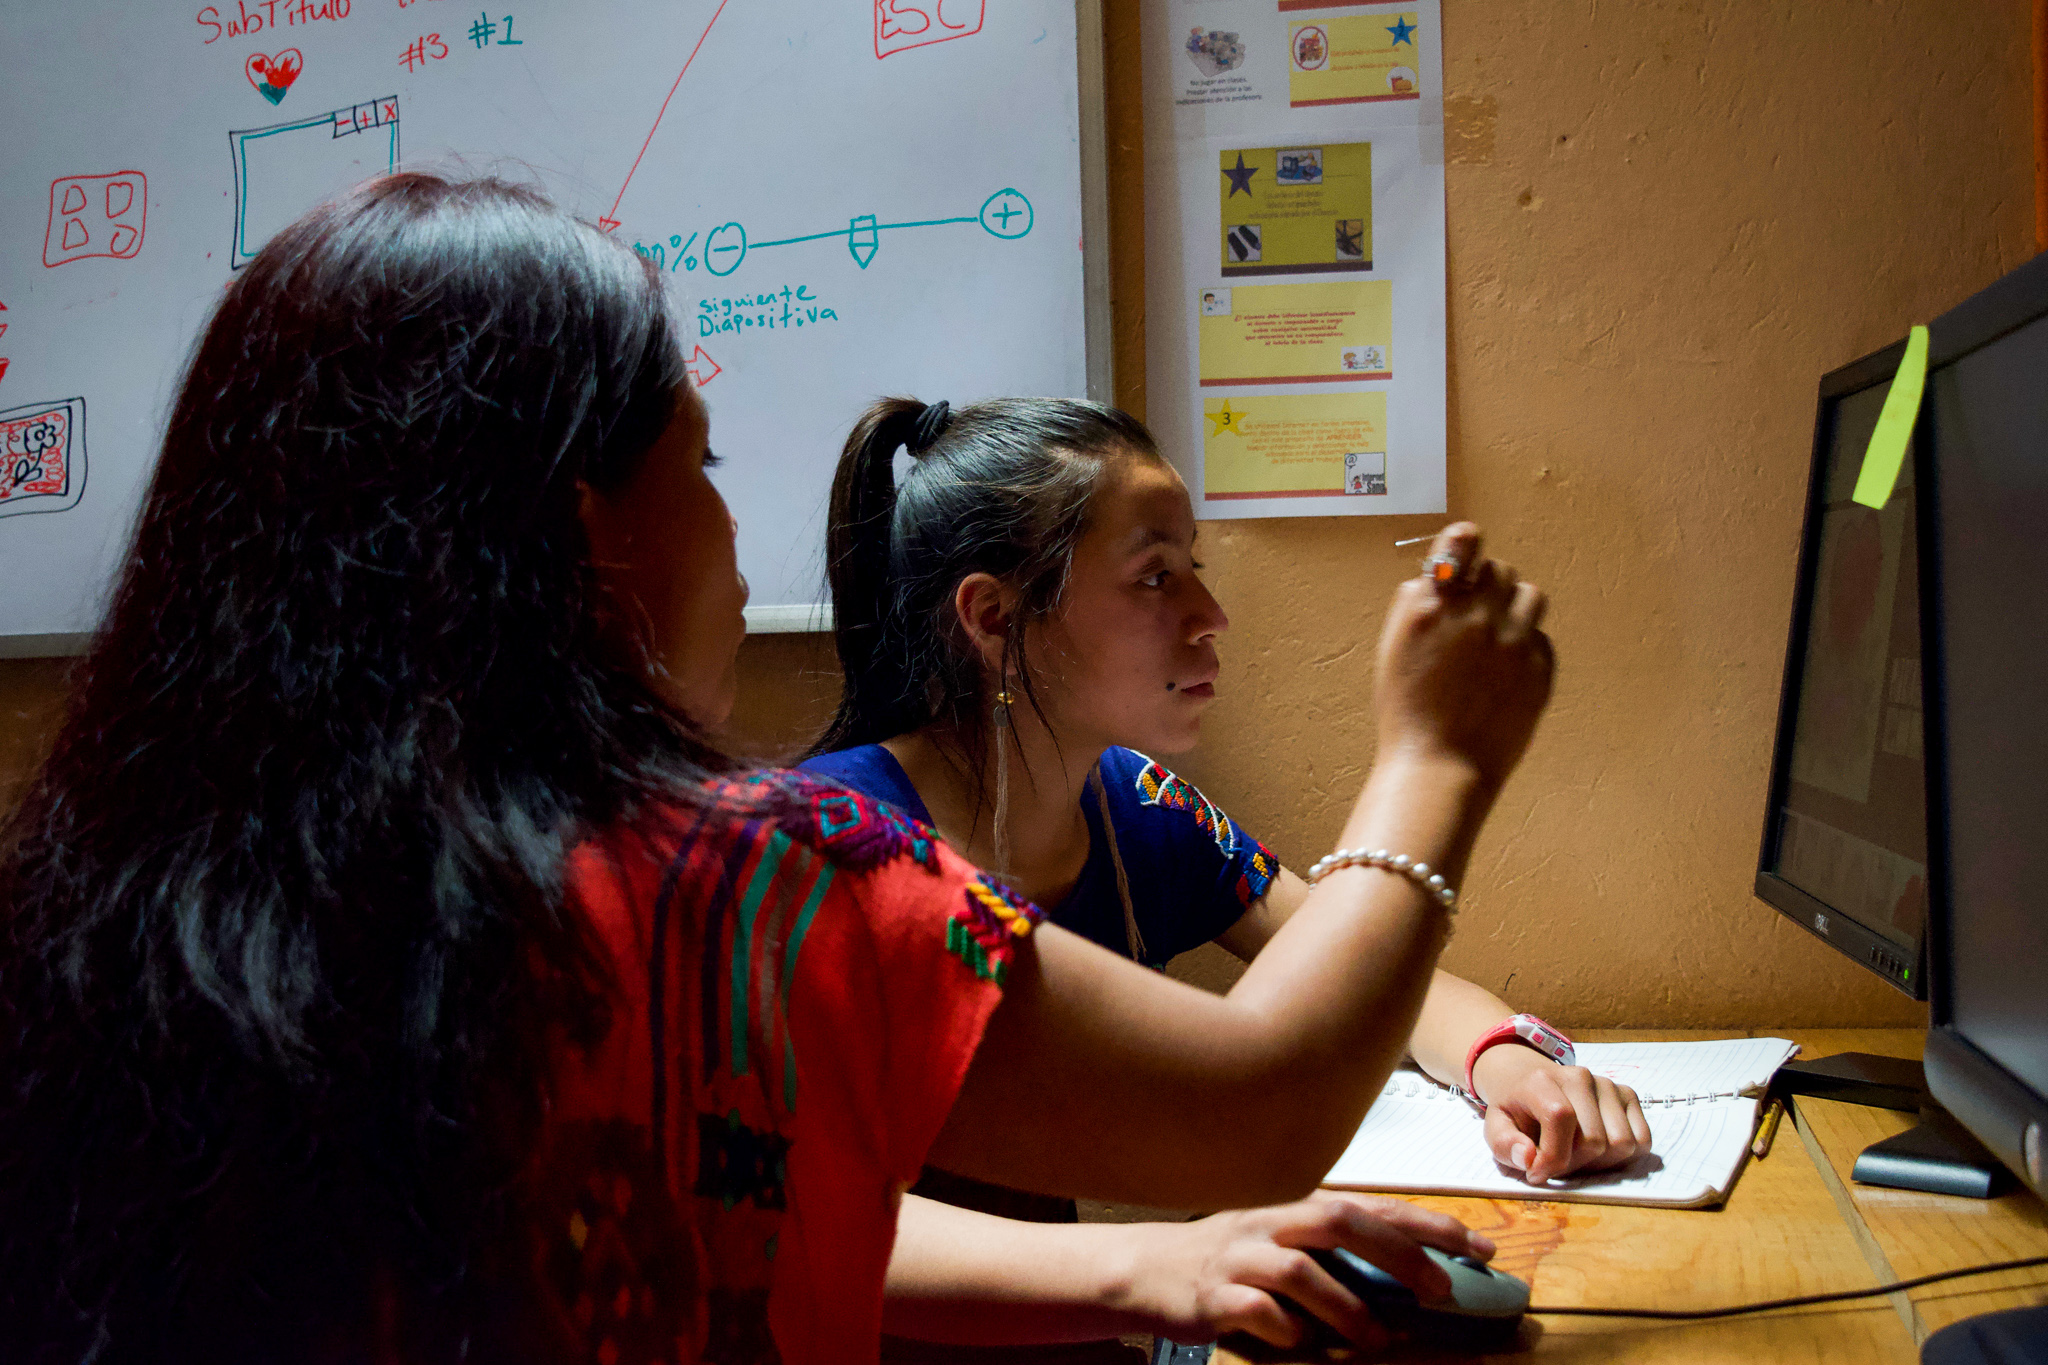 In Chajul, the future (of technology) is female!